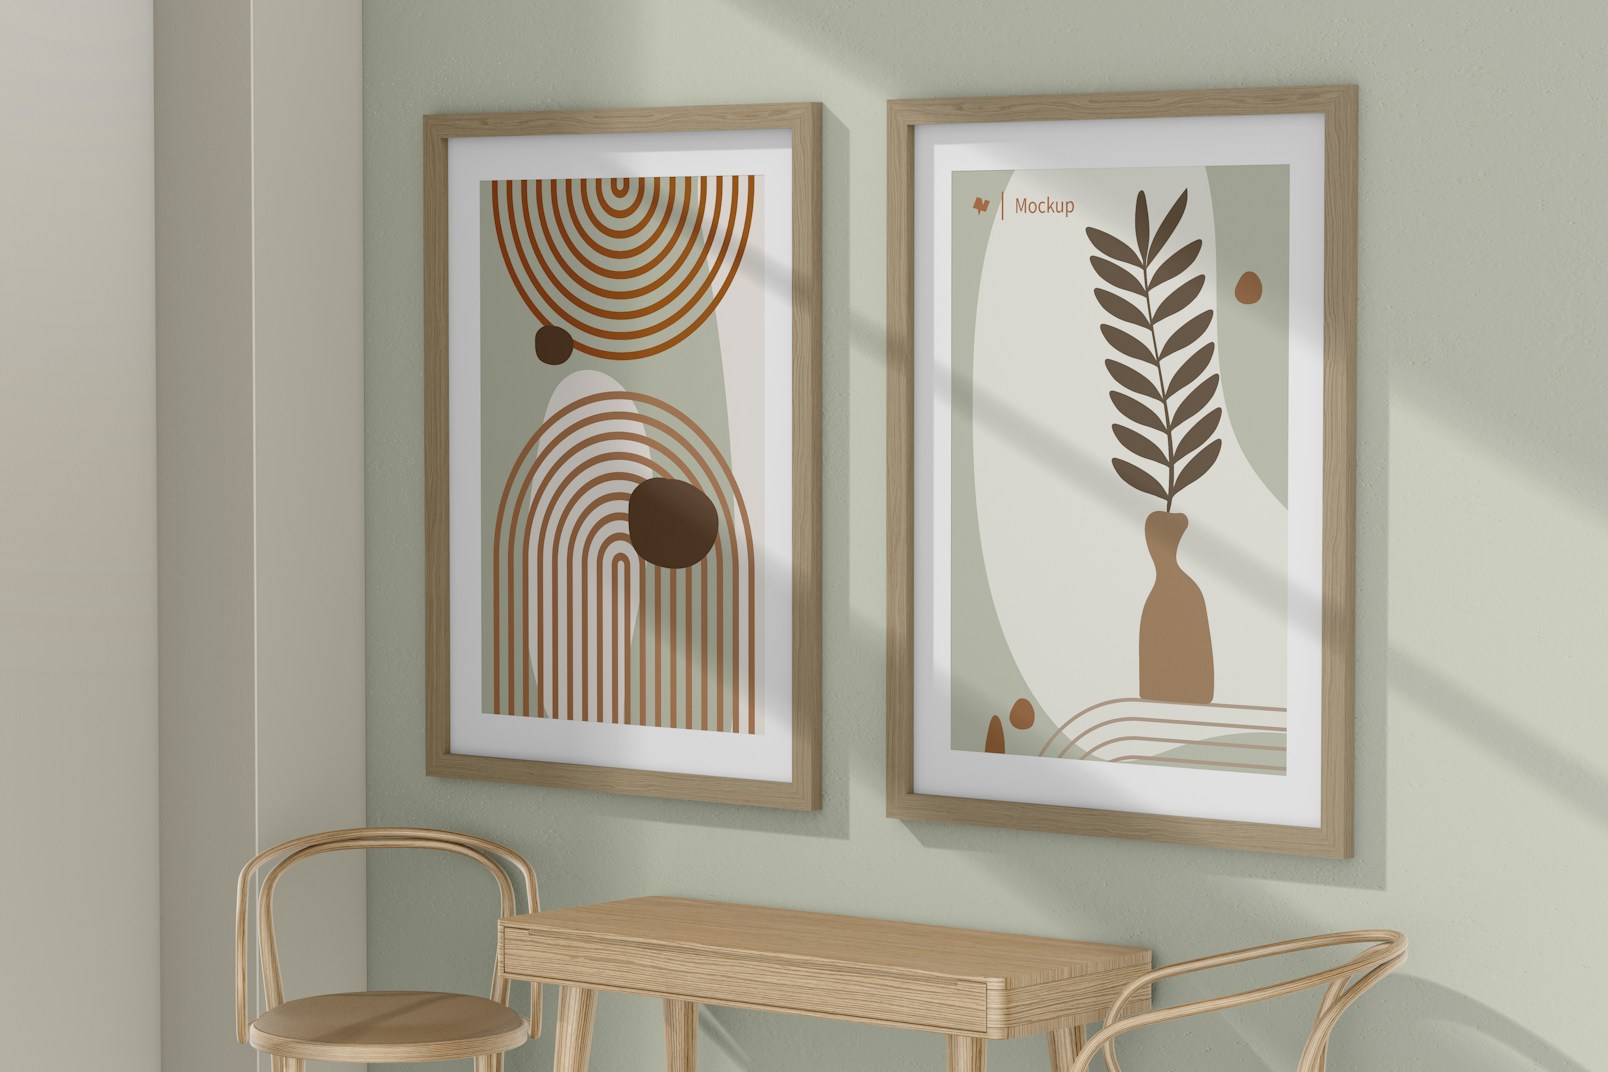 Large Nordic Frames with Passepartout Mockup, with Chair